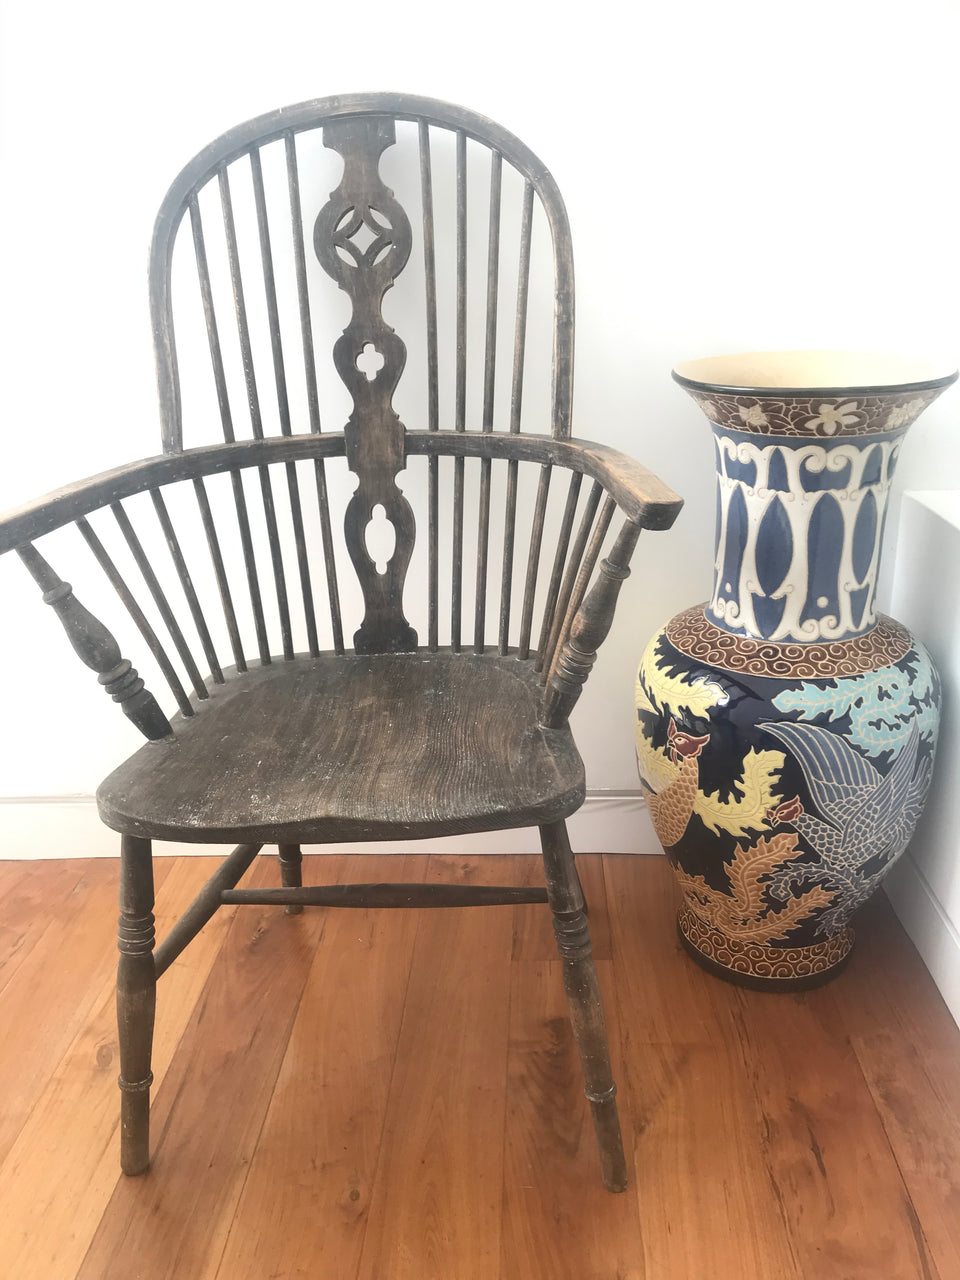 collections/windsorchair.jpg